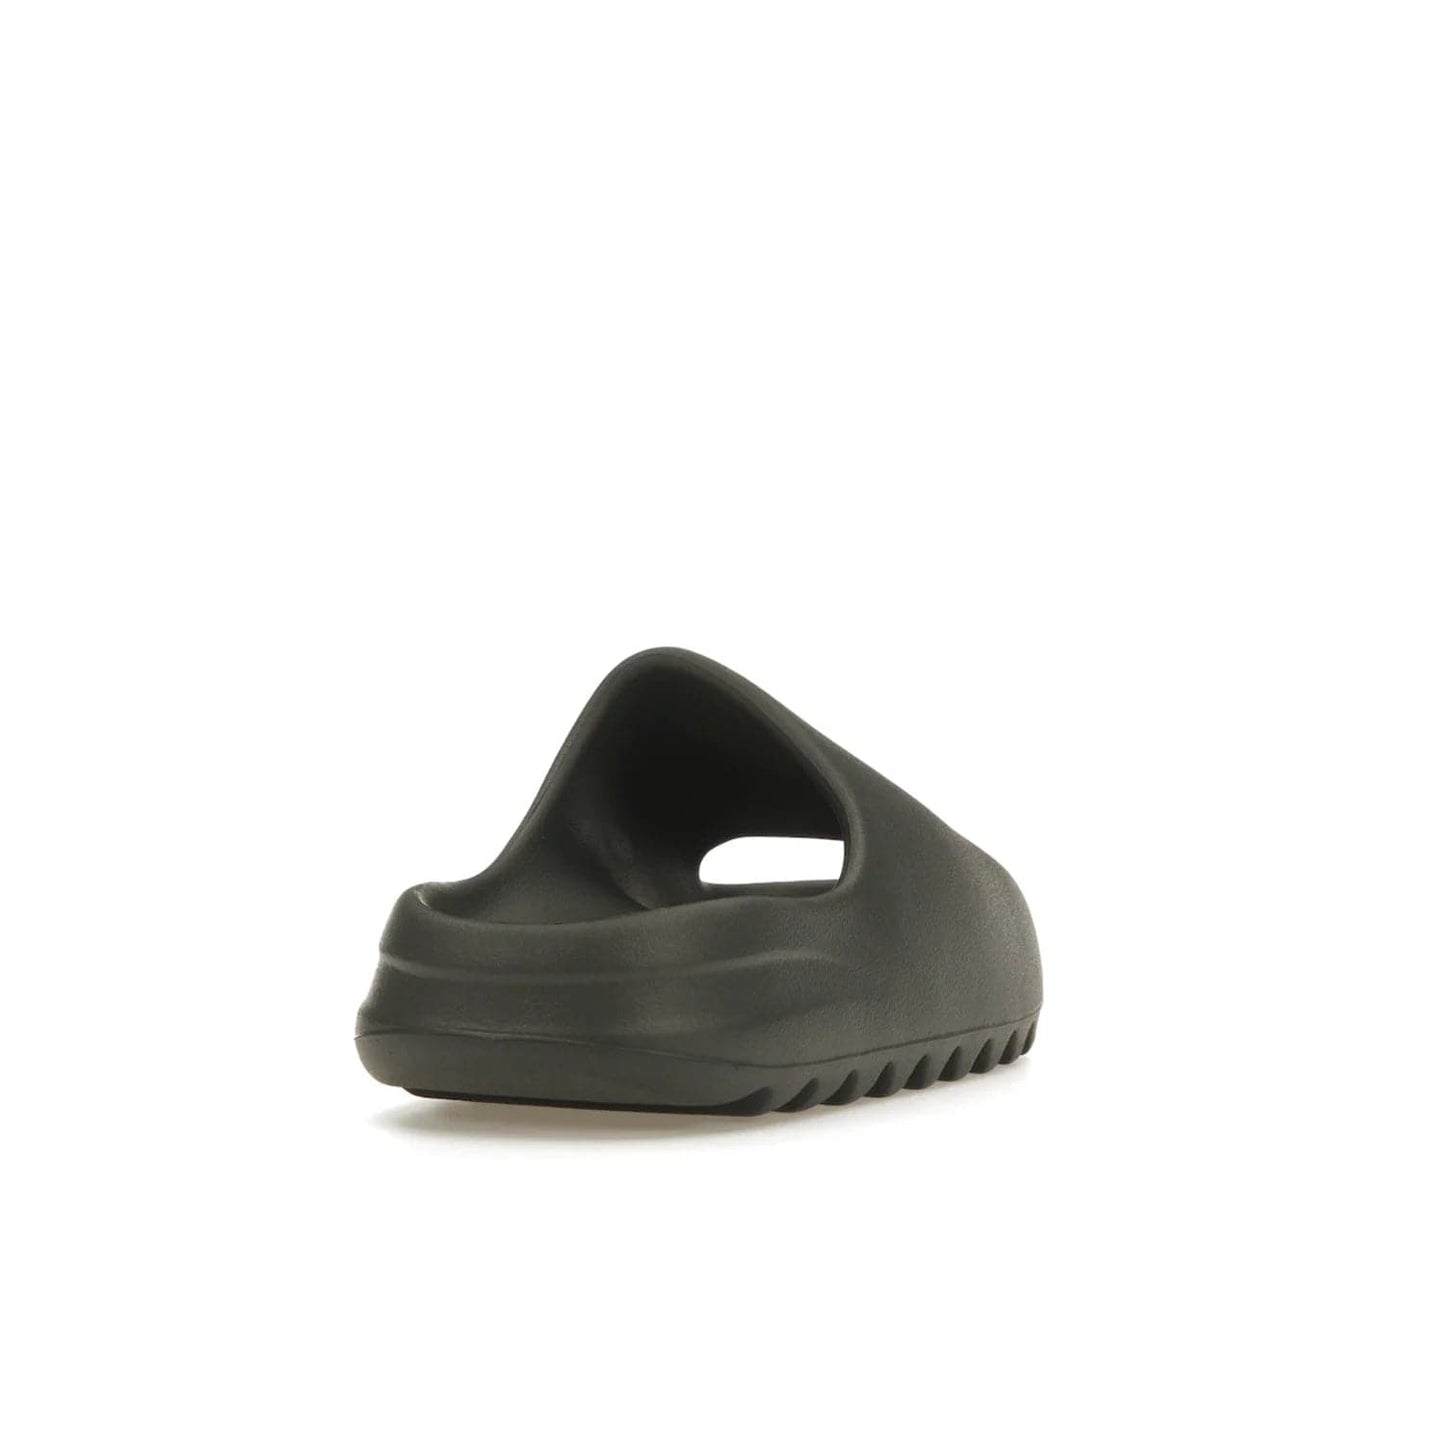 adidas Yeezy Slide Granite - Image 30 - Only at www.BallersClubKickz.com - Introducing the adidas Yeezy Slide Granite with a sleek, soft-to-touch one-piece upper – perfect for making a statement with its minimalistic design and luxurious comfort. Get yours now for only $70.